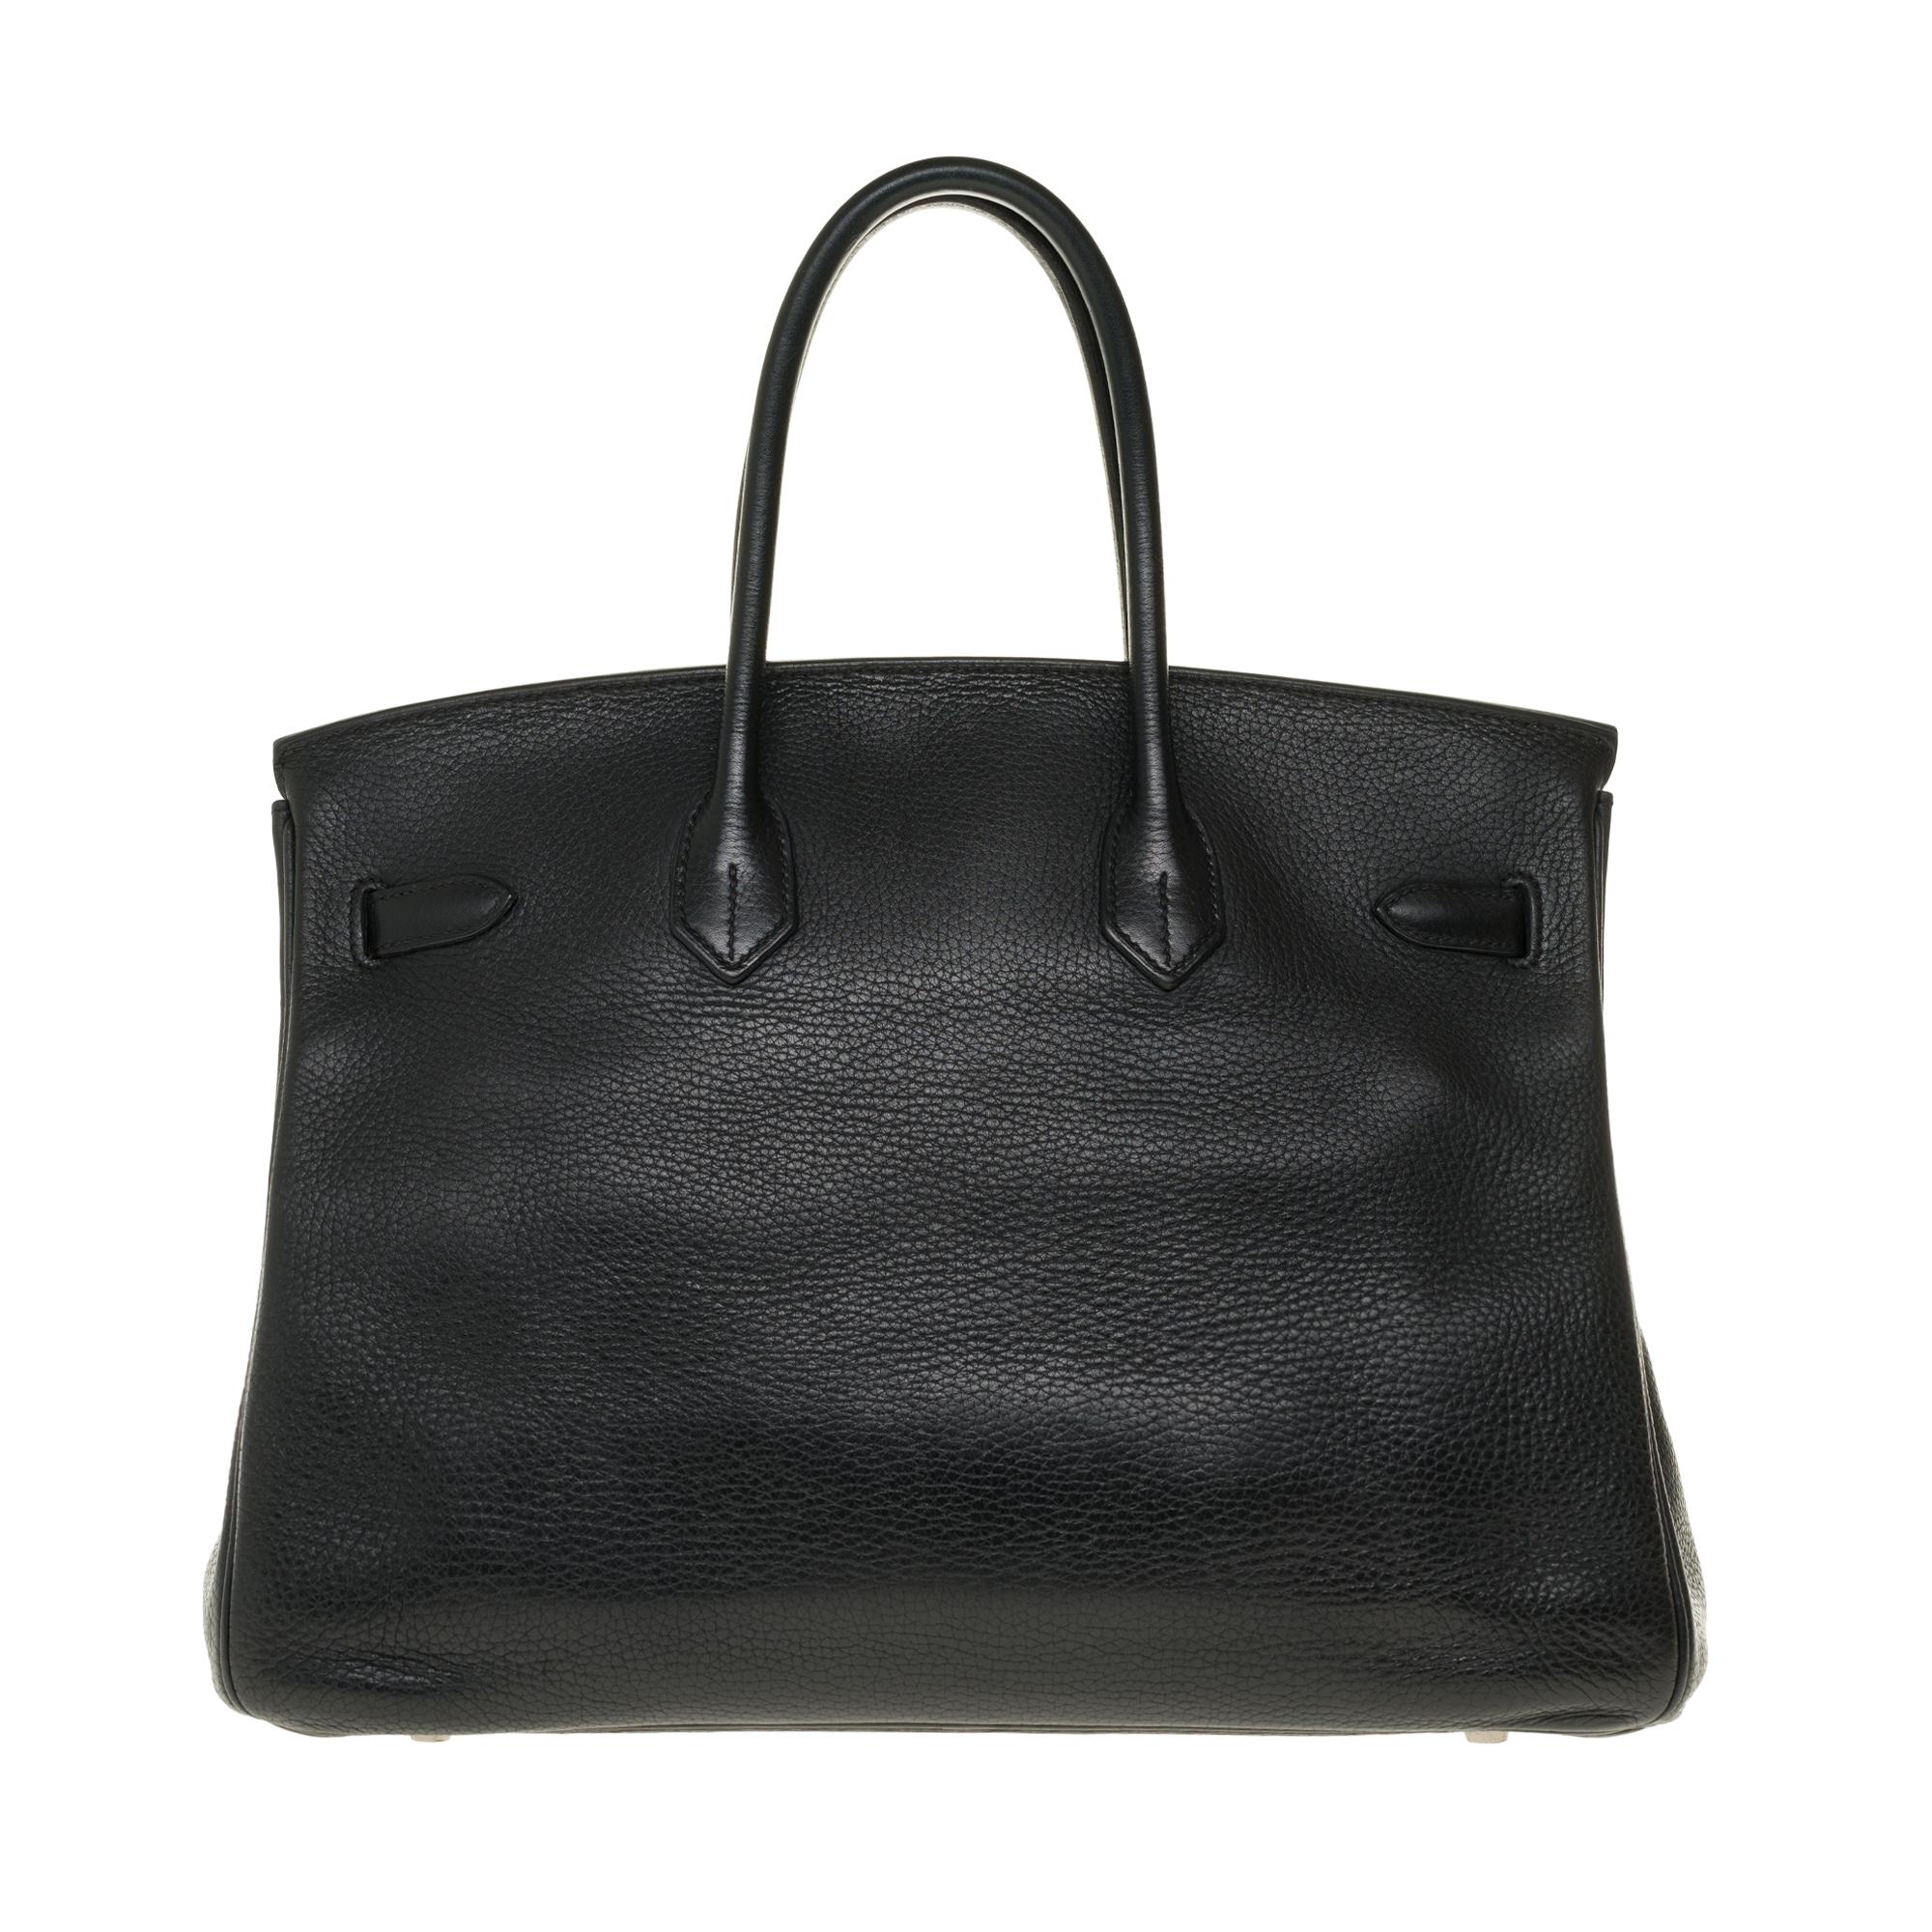 Beautiful Hermes Birkin 35 cm handbag in black Togo leather with palladium silver metal hardware, double handle in black leather allowing a handheld.

Closure by flap.
Lining in black leather, a zipped pocket, a patch pocket.
Signature: 